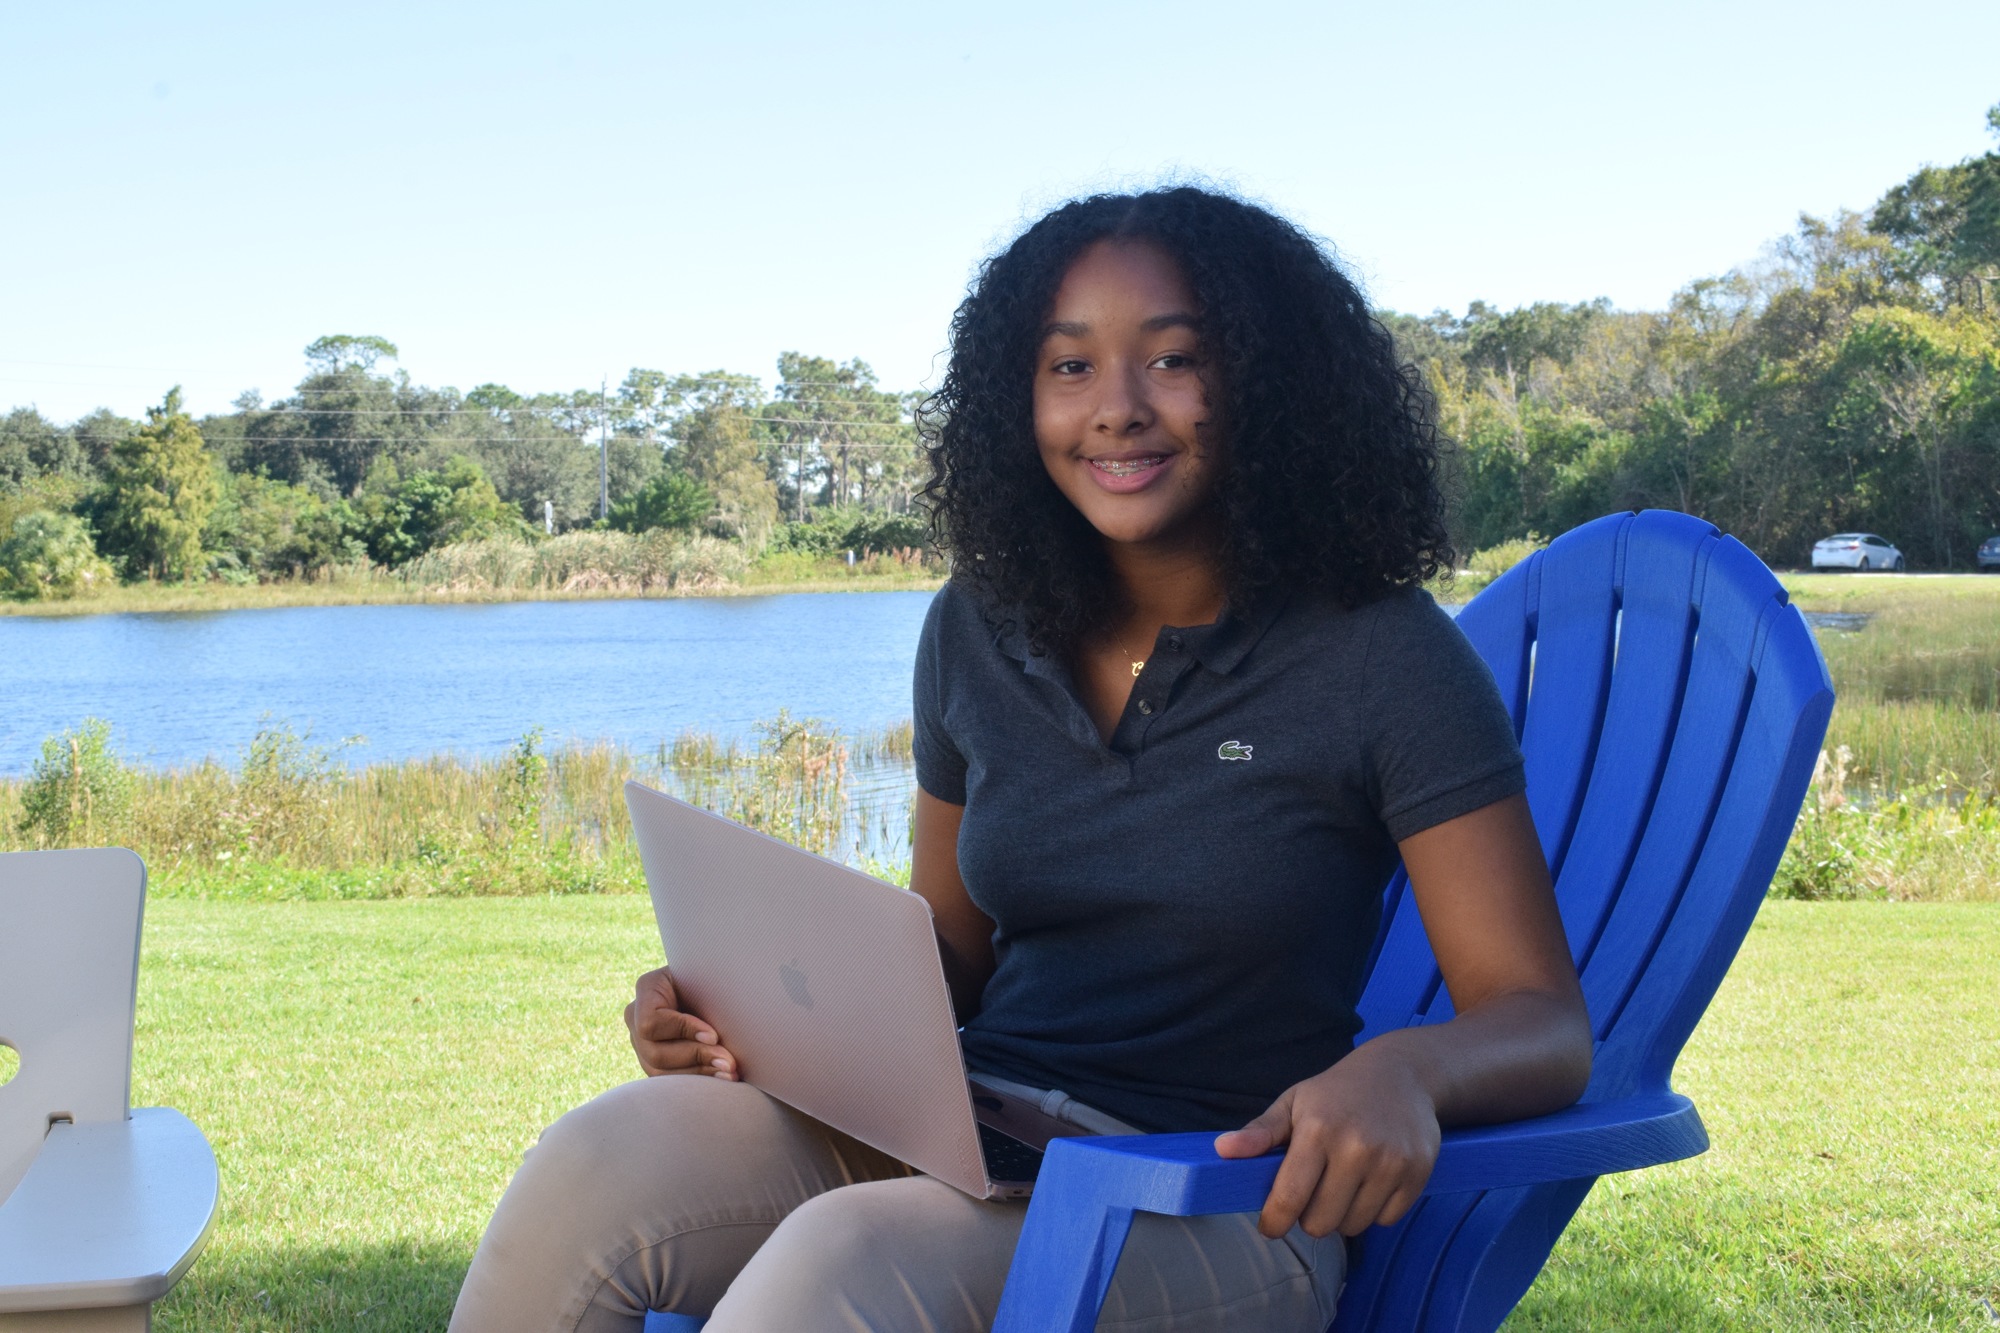 Ciniya Moore, a freshman, works outside by the lake because of the scenery and peacefulness.